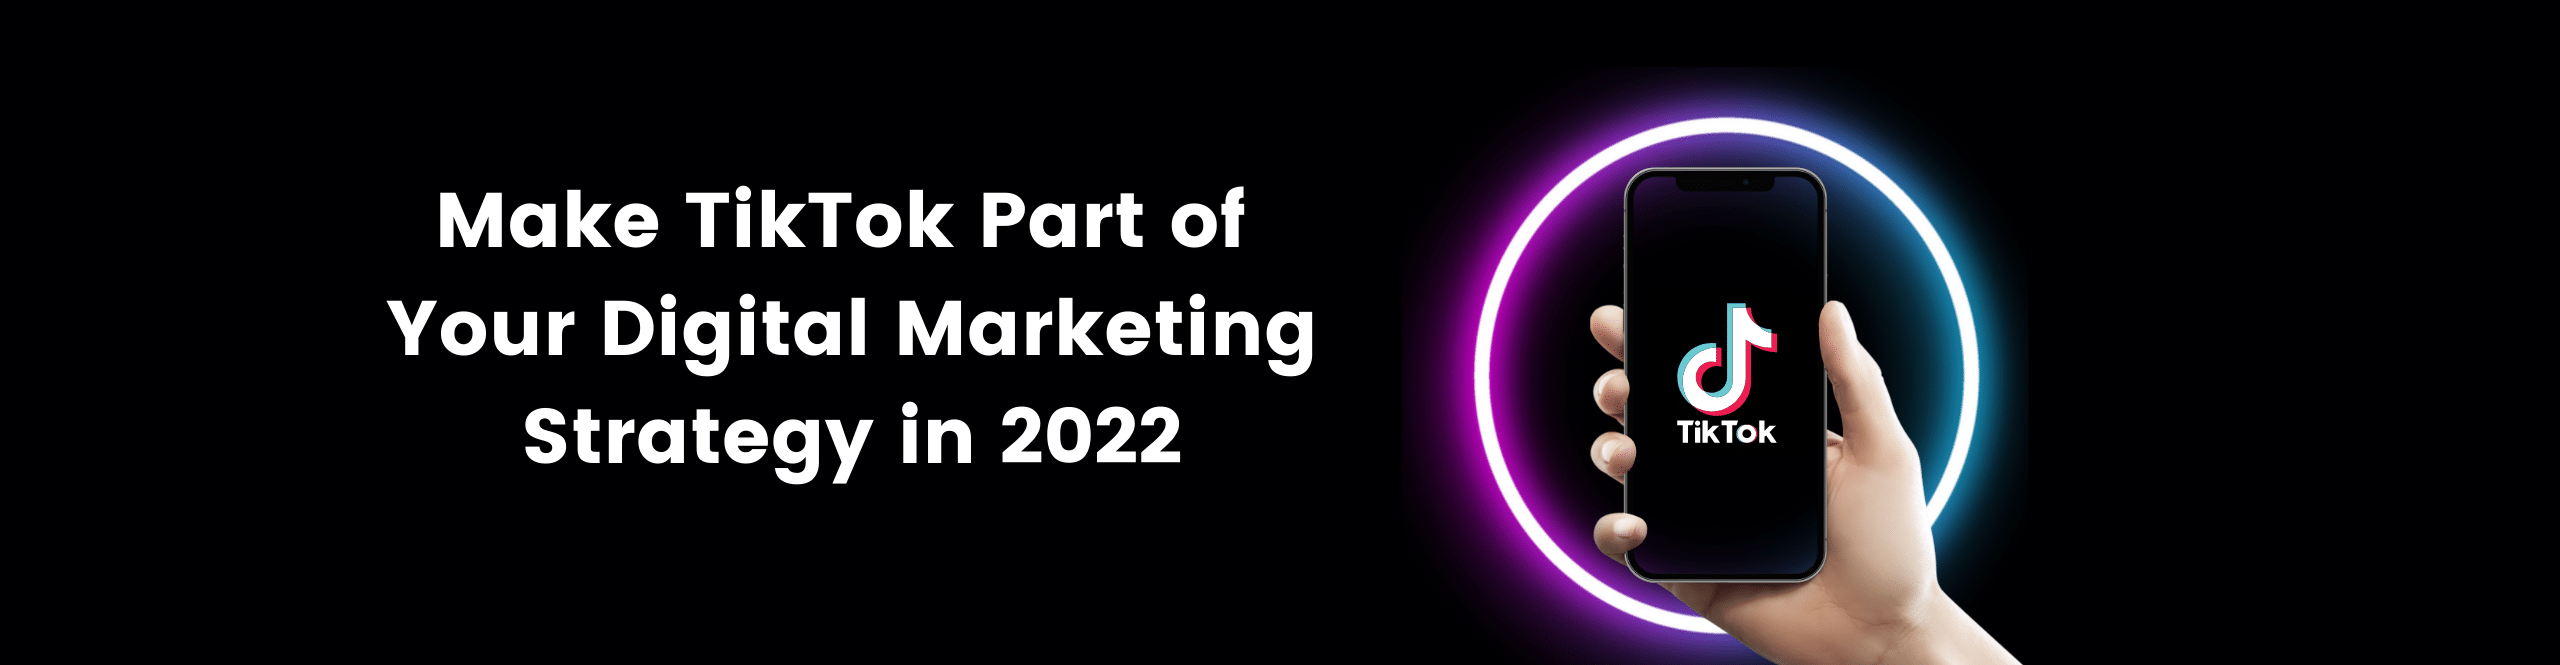 How to Make TikTok Part of Your Marketing Strategy in 2022